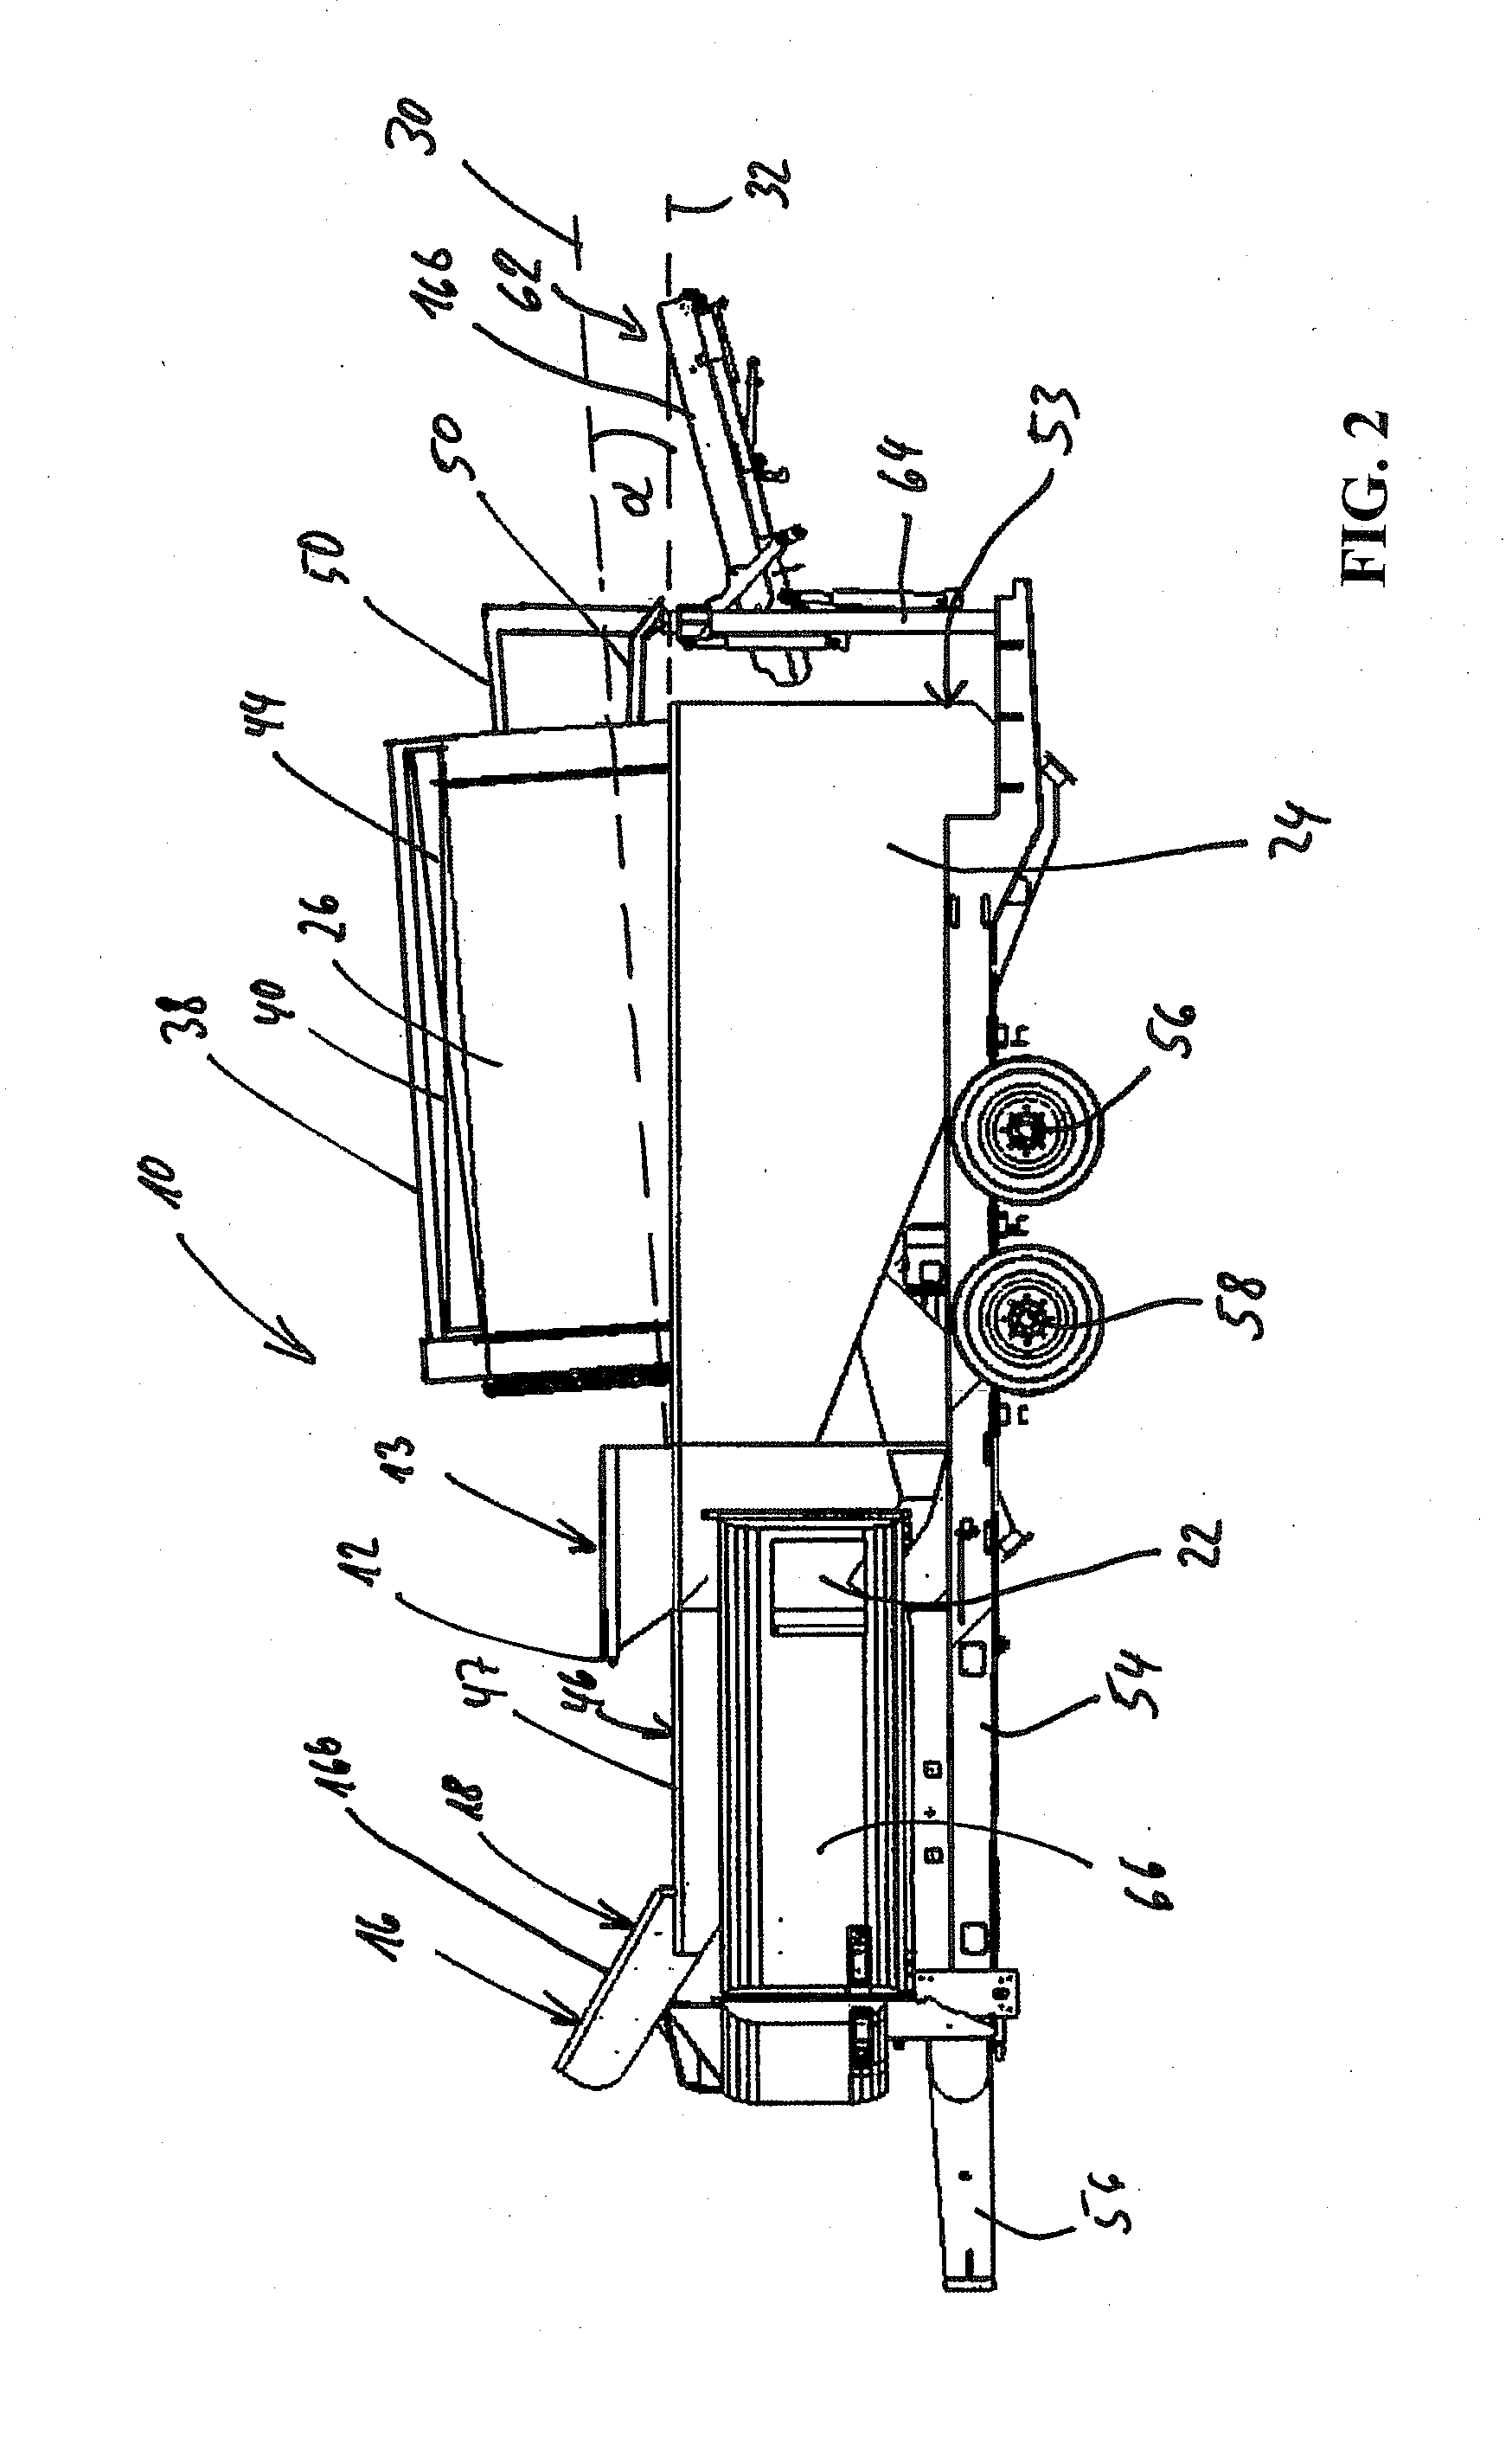 Apparatus for cleaning field crops